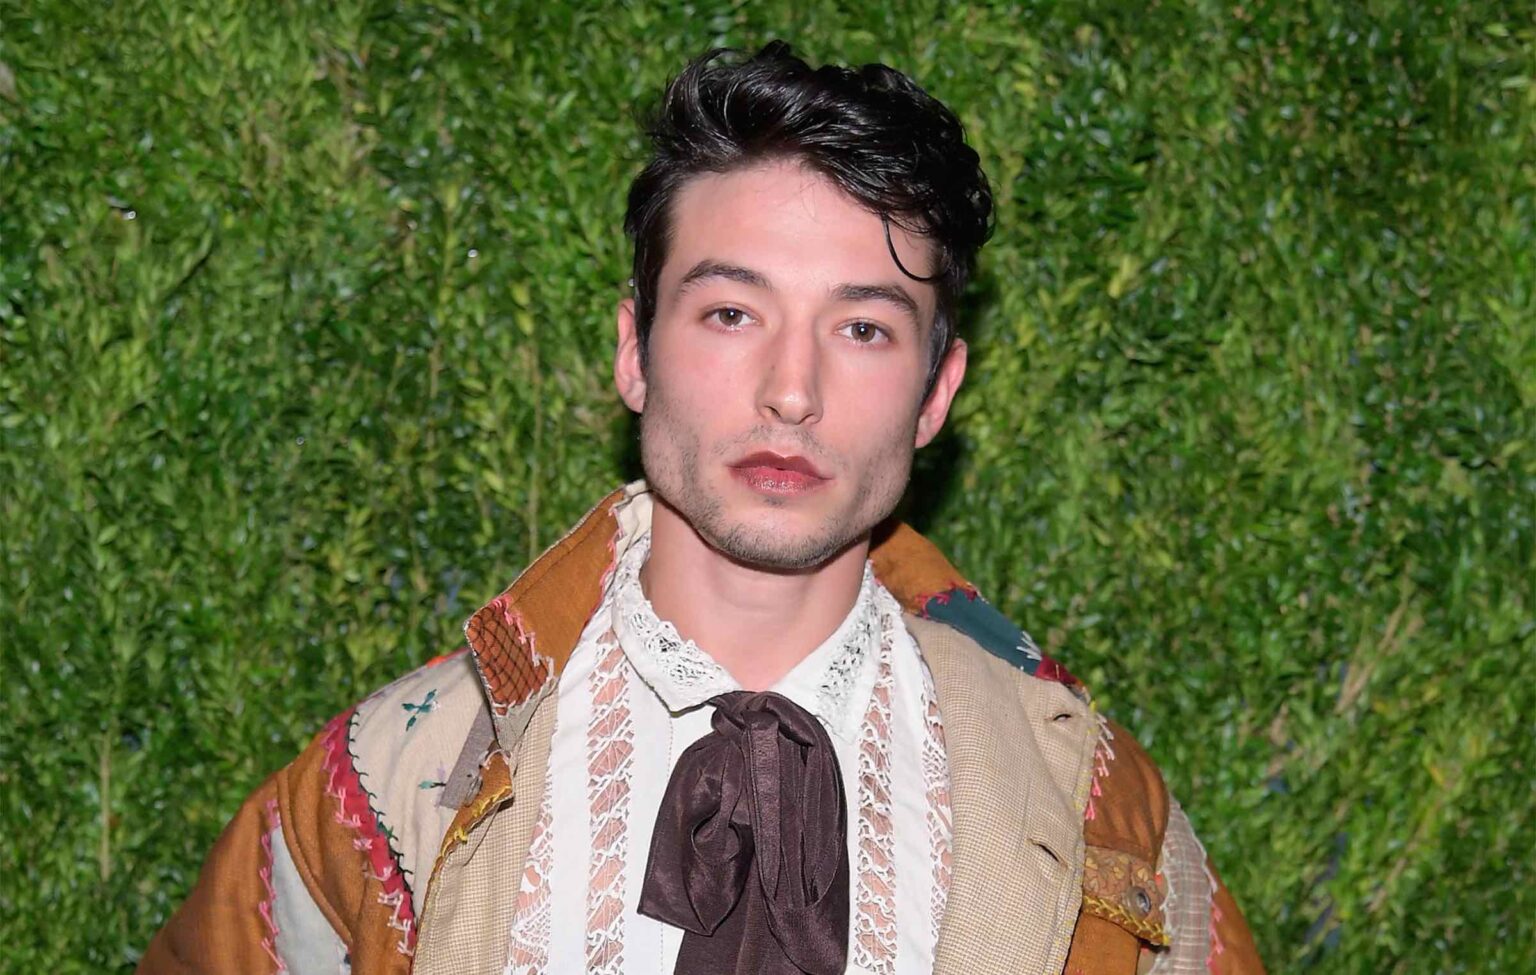 Ezra Miller of 'The Flash' just proved that playing a superhero on-screen doesn’t make you above the law in real life. Discover why he was just arrested.